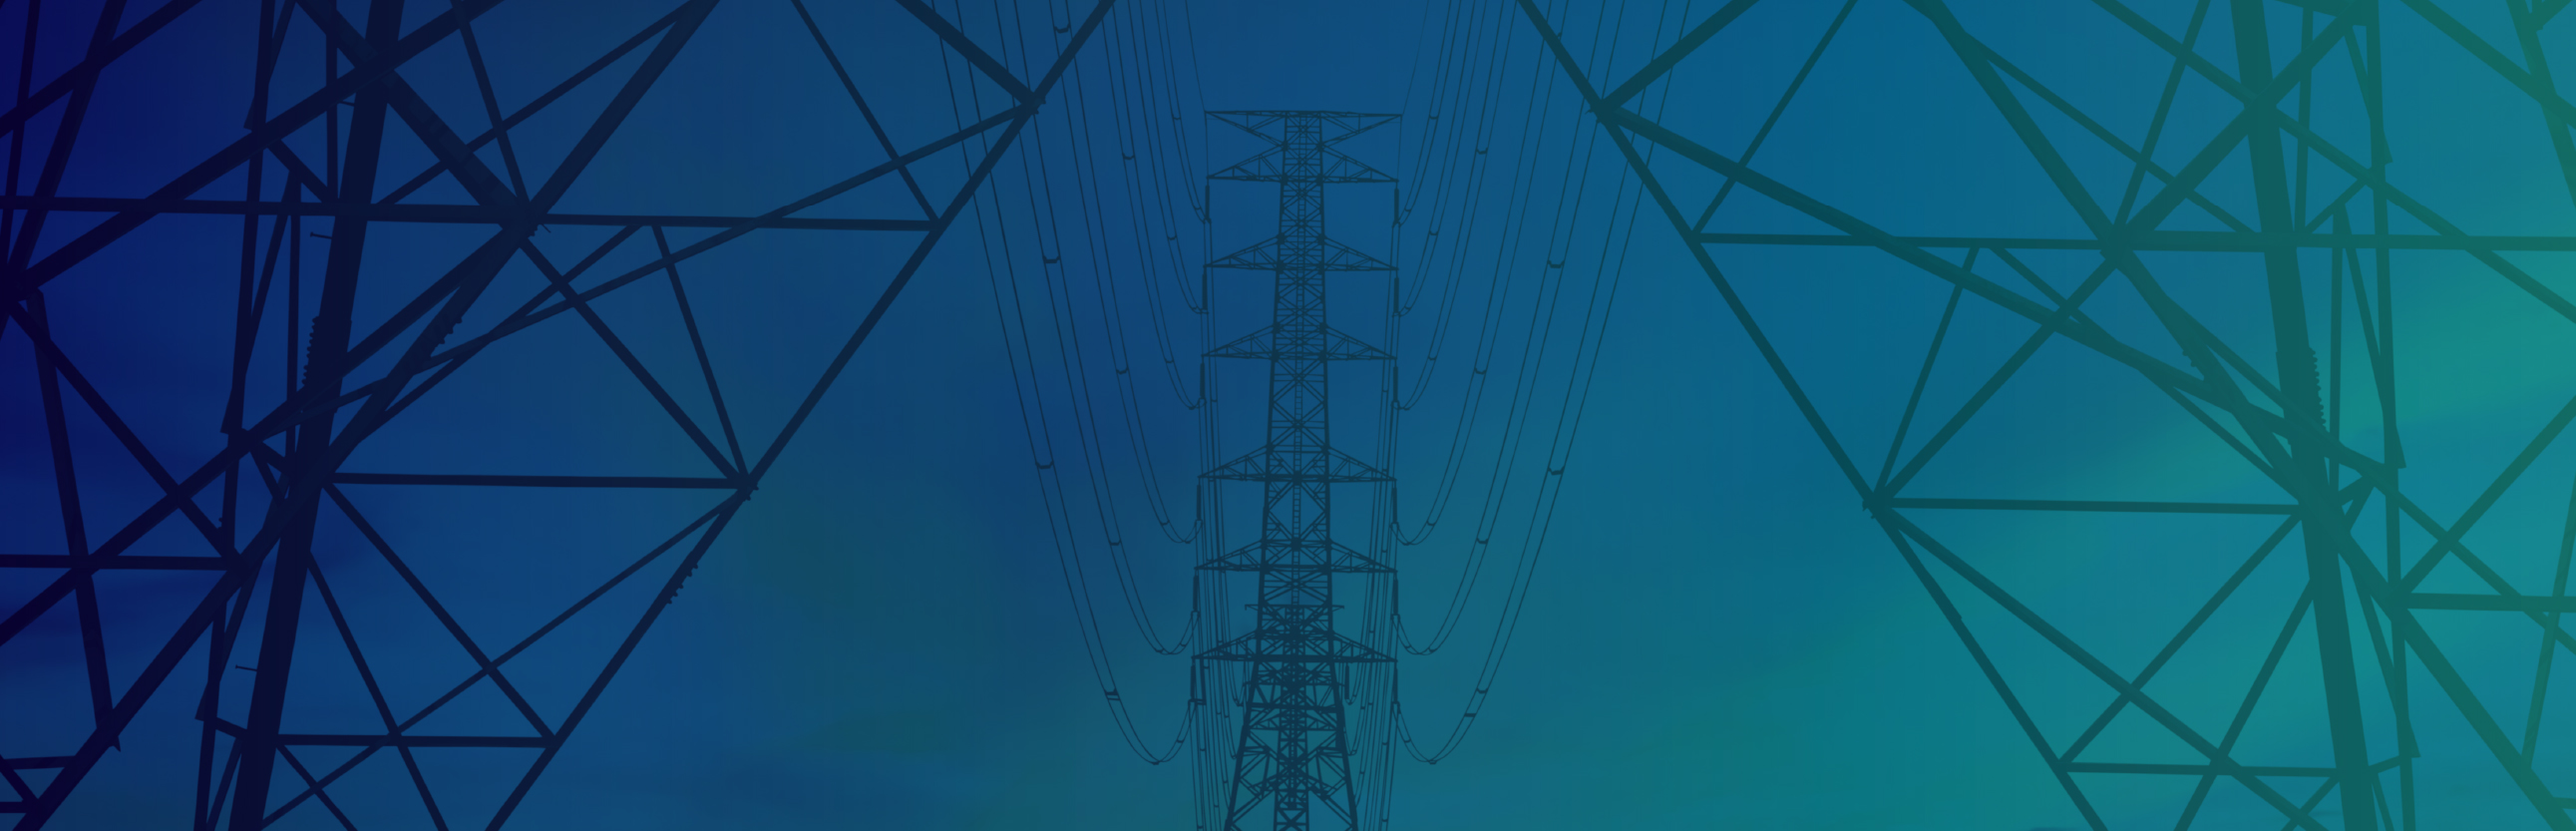 close up view of power line tower on a gradient background of dark teal to lighter teal